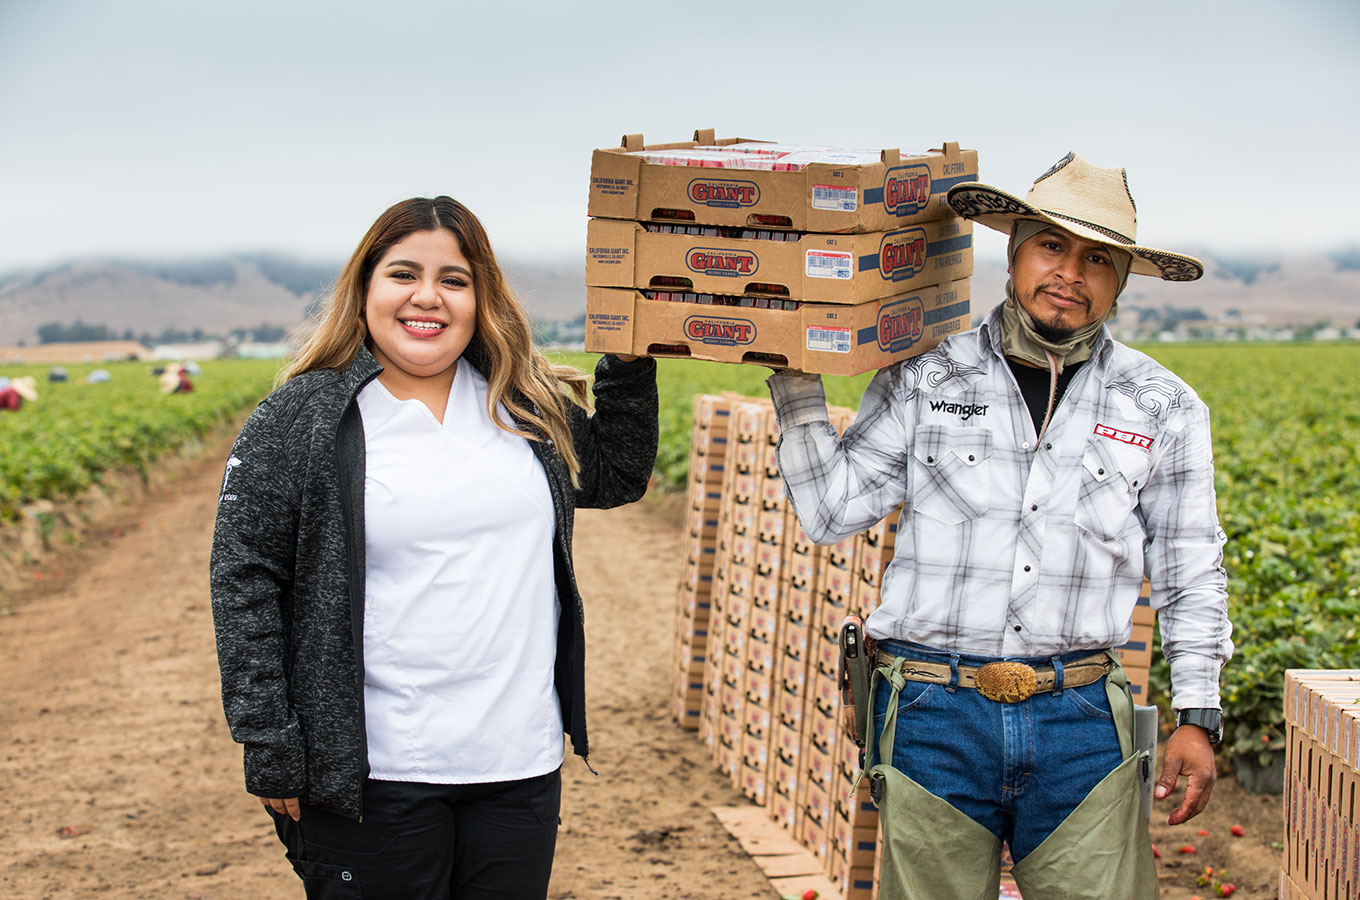 A nursing student on the left and an agricultural worker hold up boxes of fruit